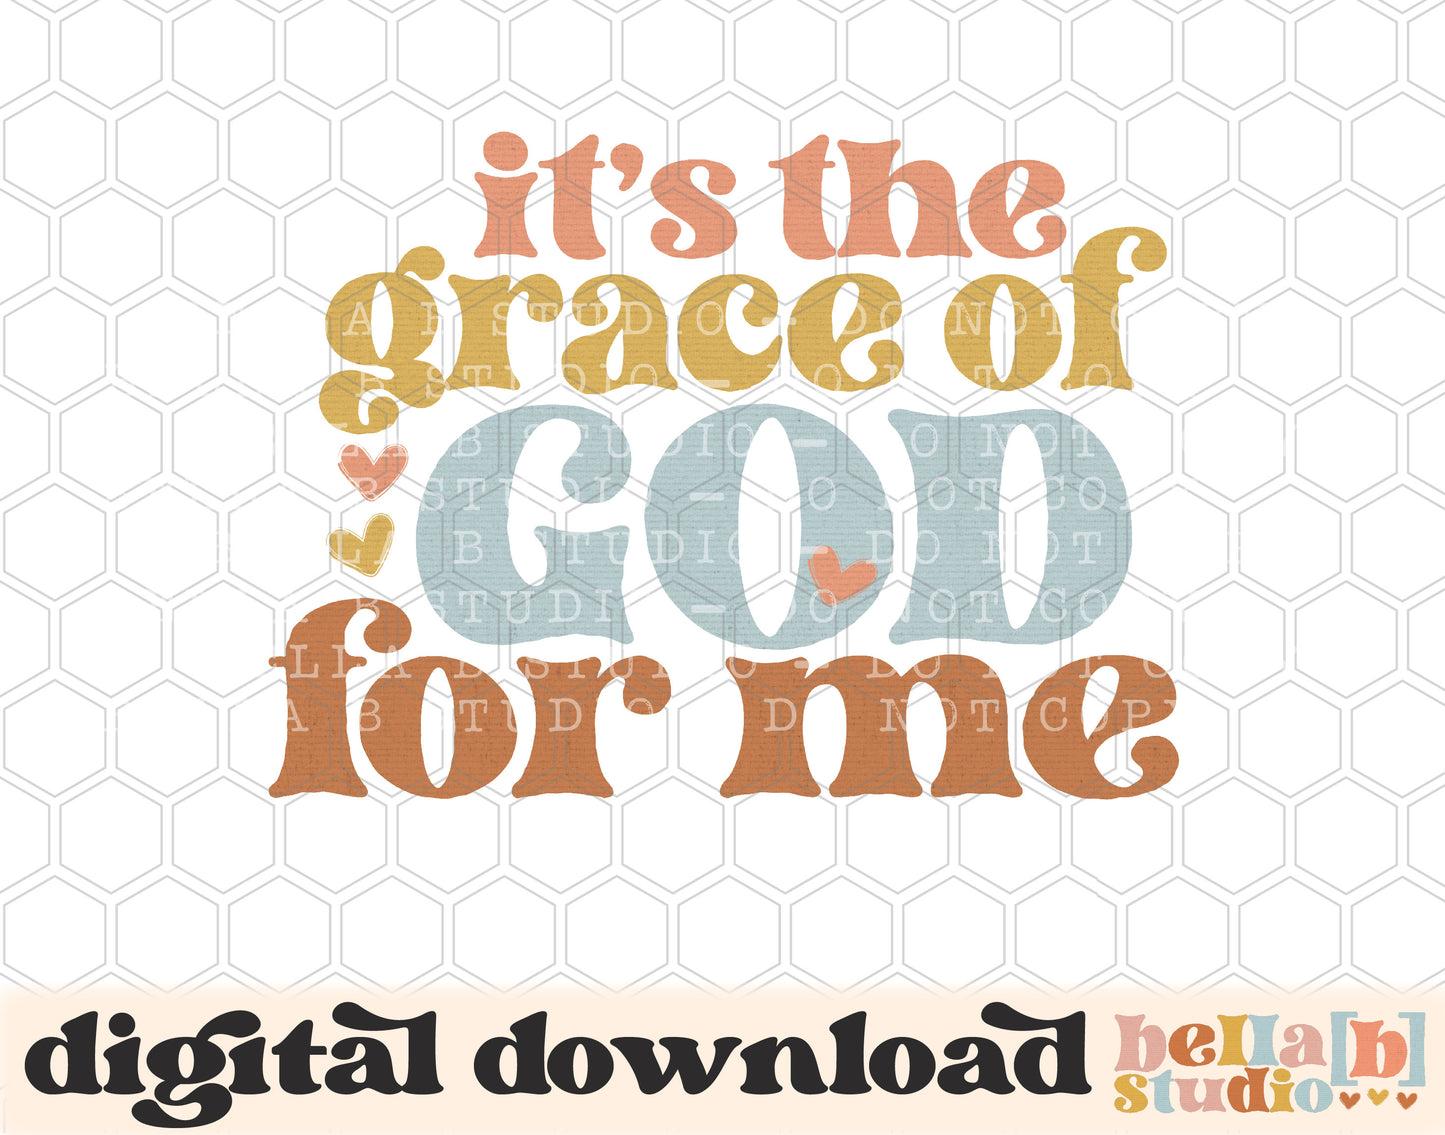 It's The Grace Of God For Me PNG Design